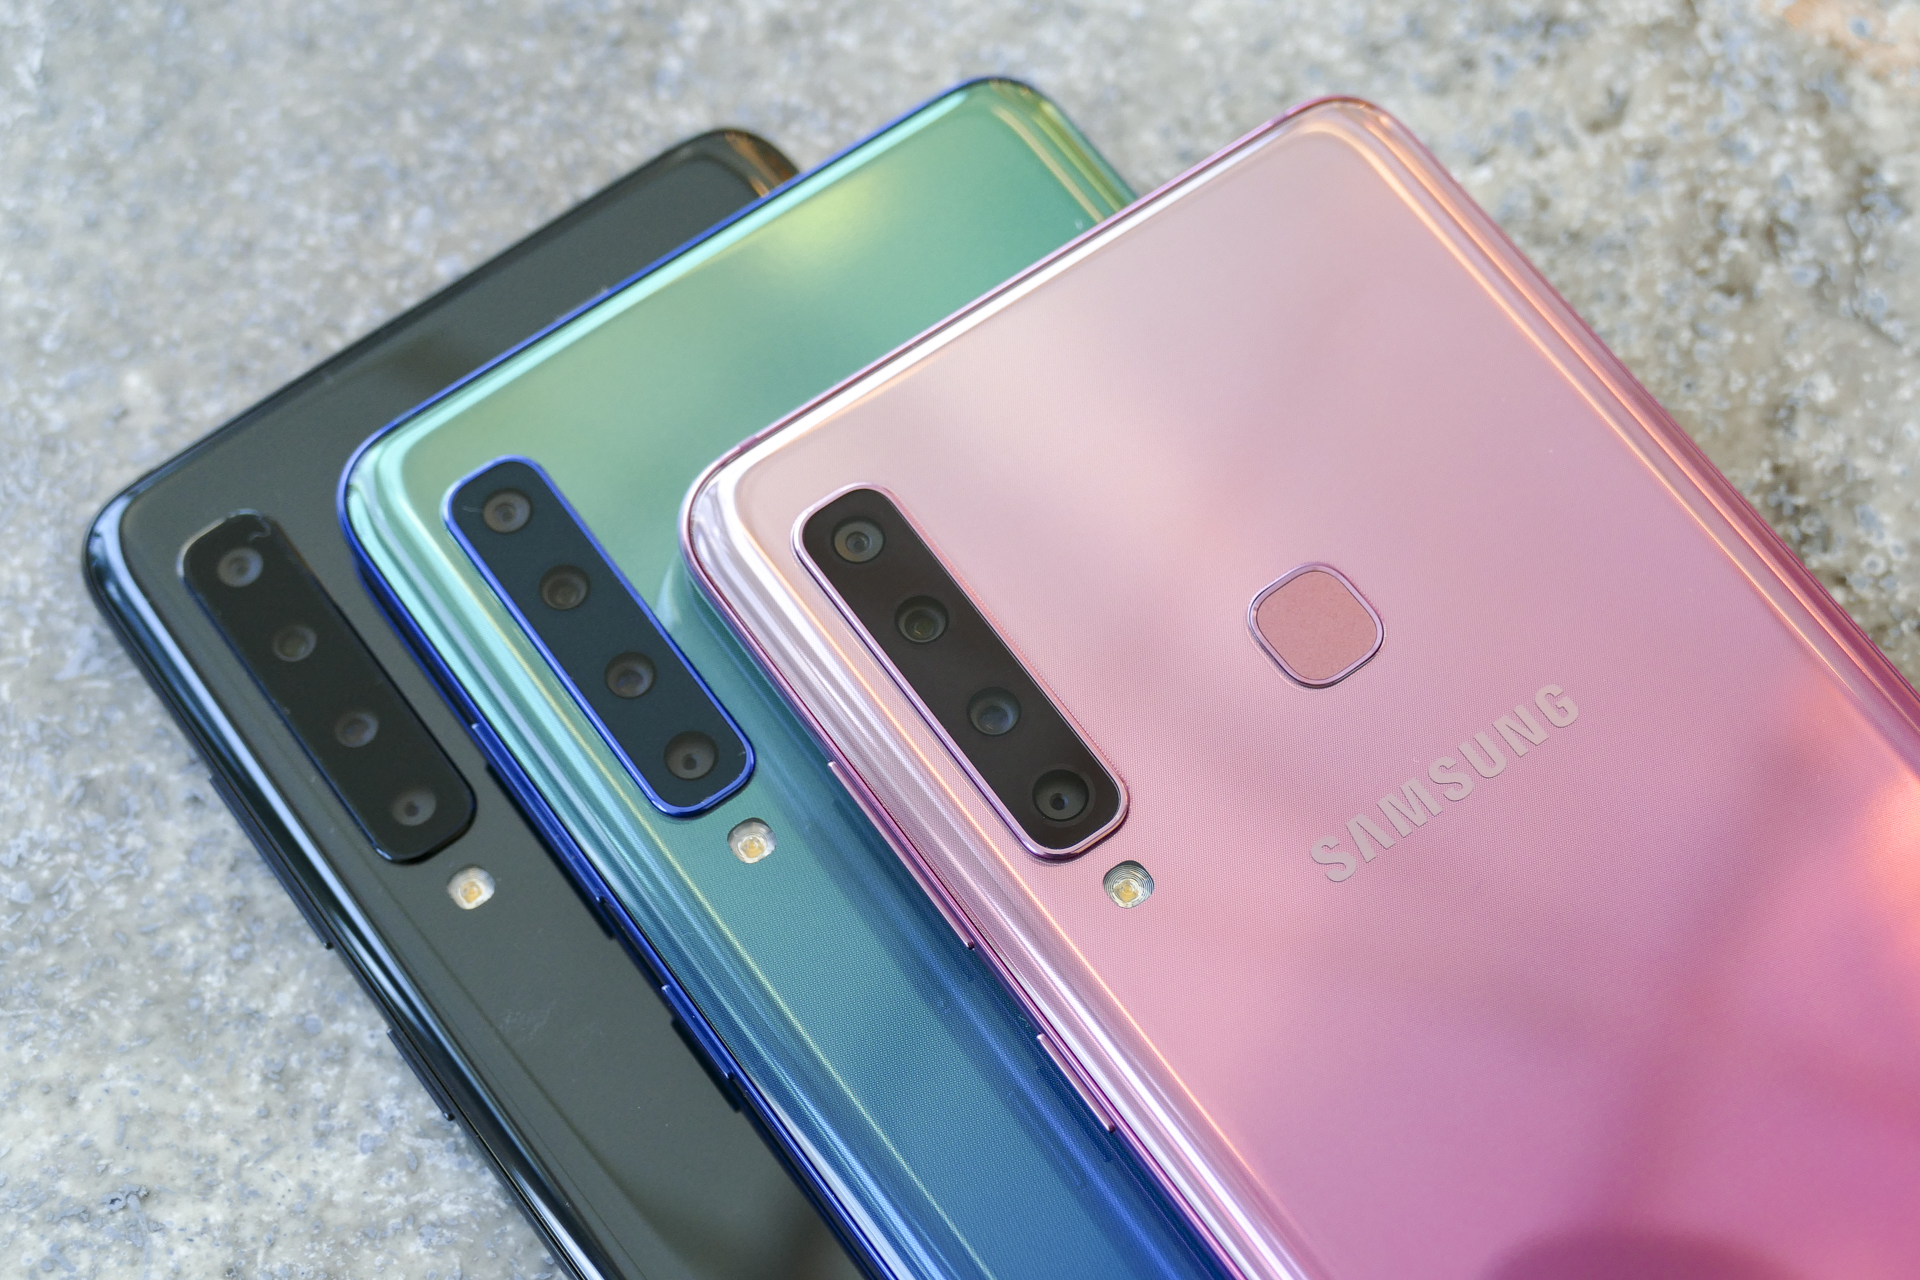 Samsung Galaxy A9 (2018) specs - Android Authority